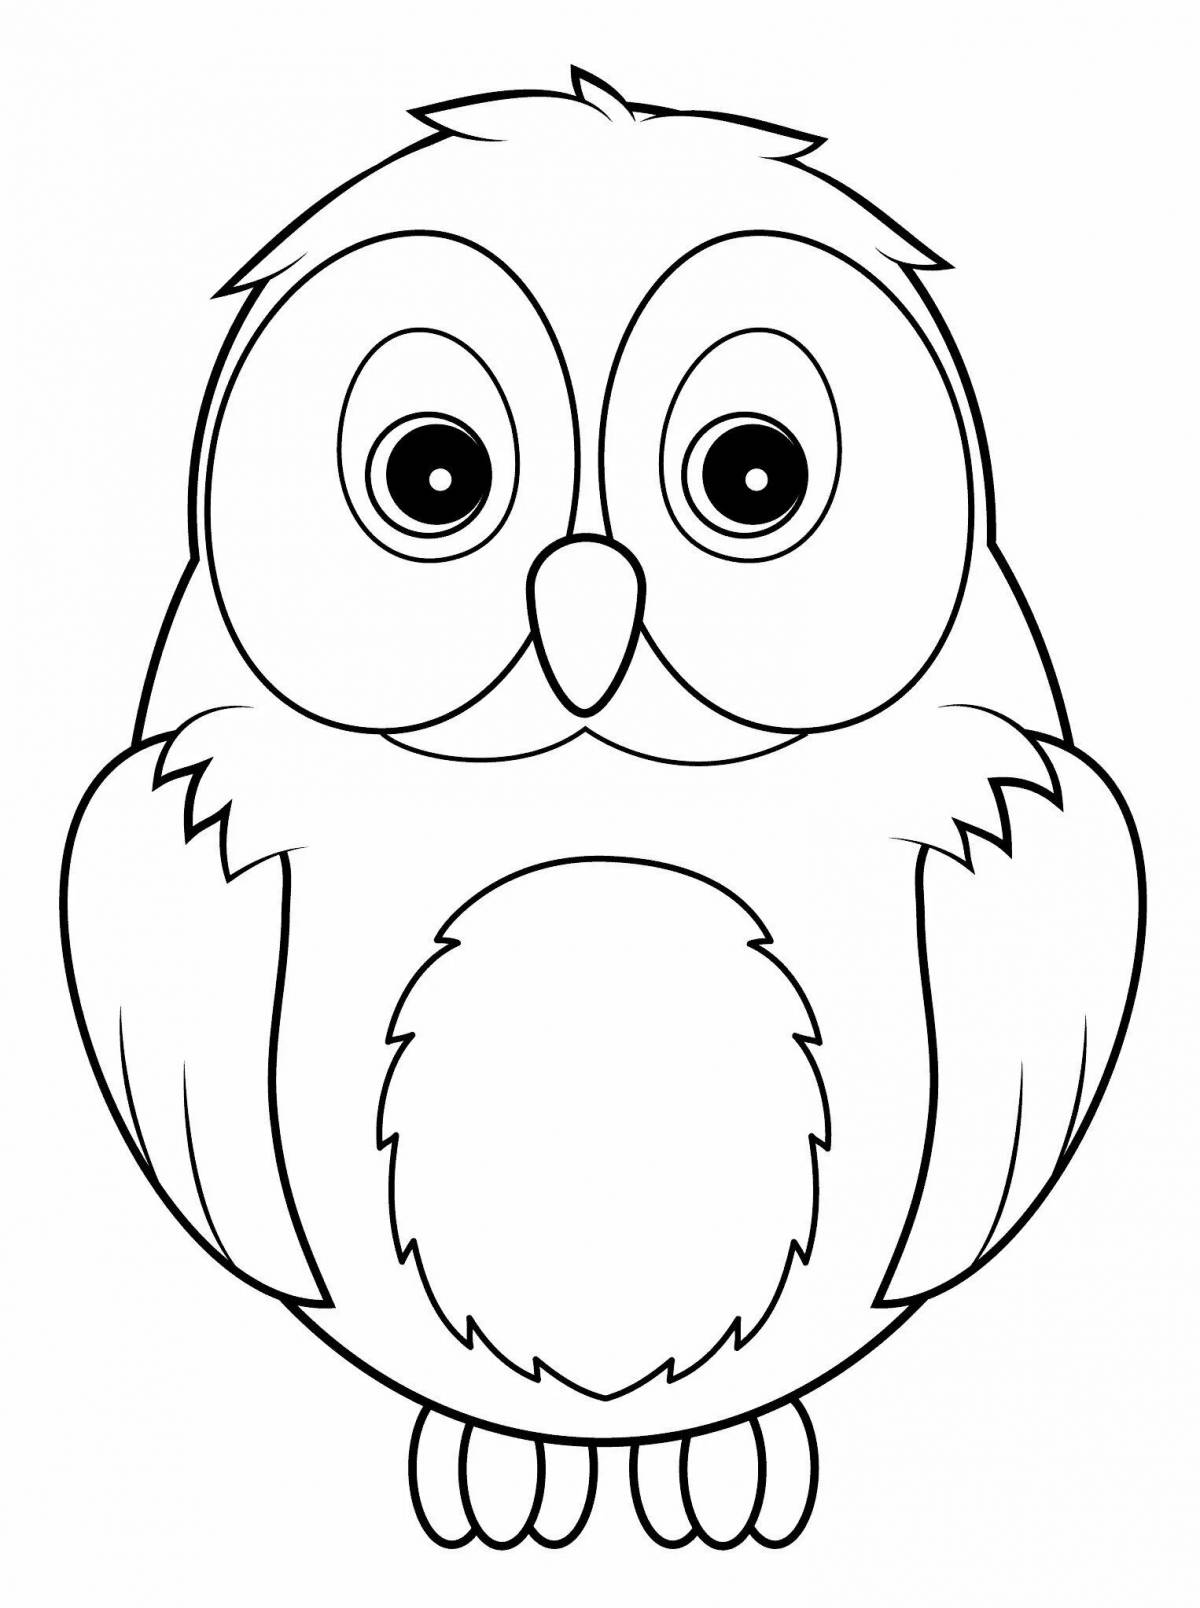 Owl picture for kids #4